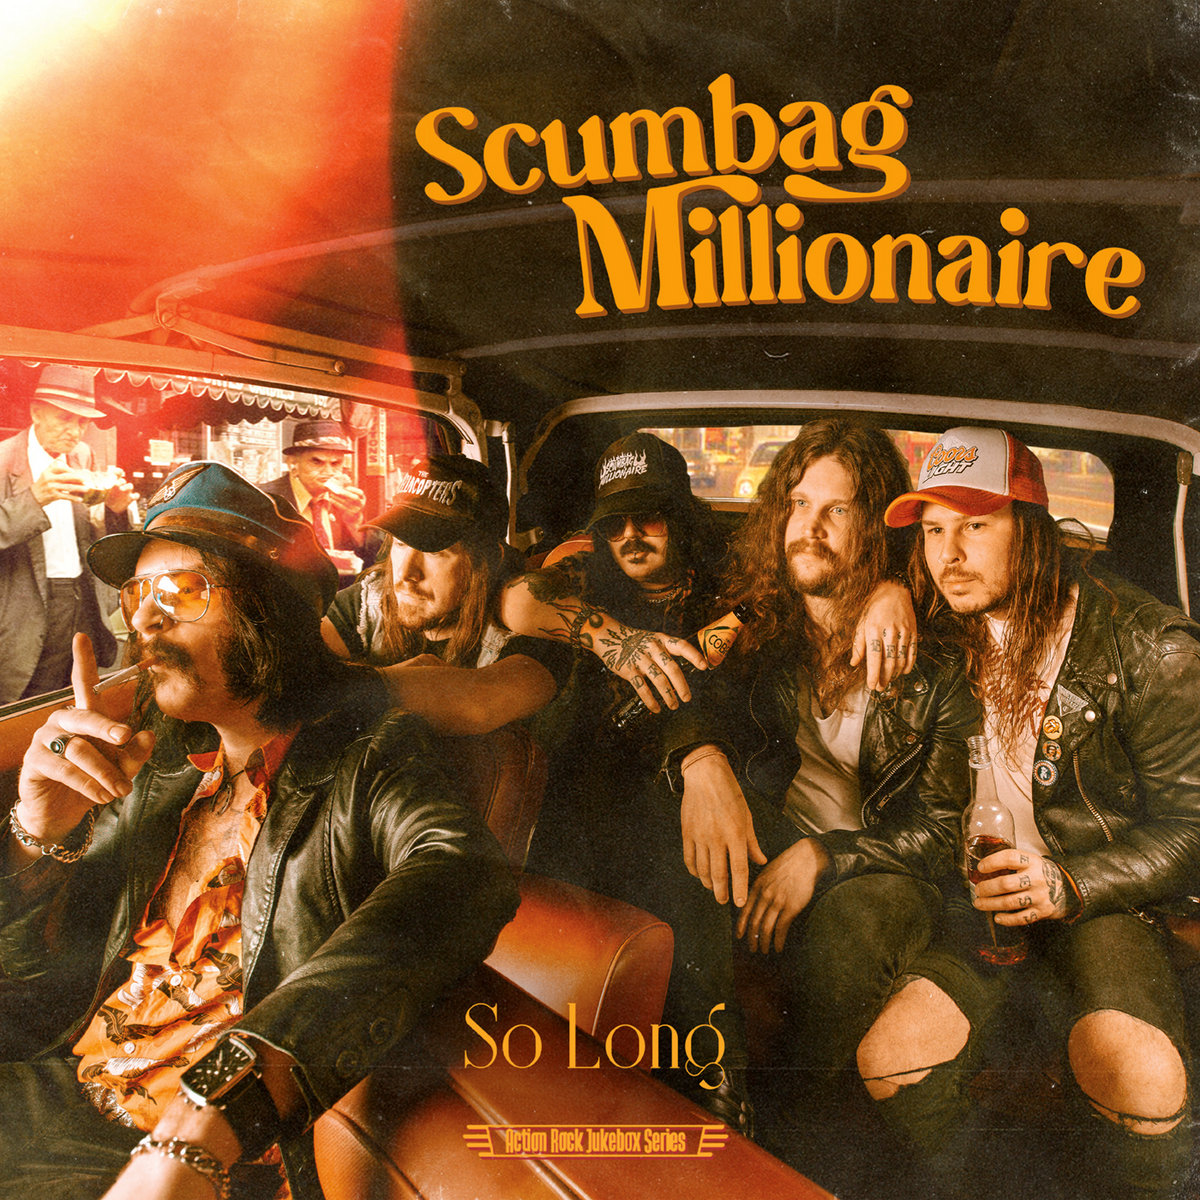 Scumbag Millionaire- So Long 7" ~WITH JUKEBOX LABEL + 45 ADAPTER!